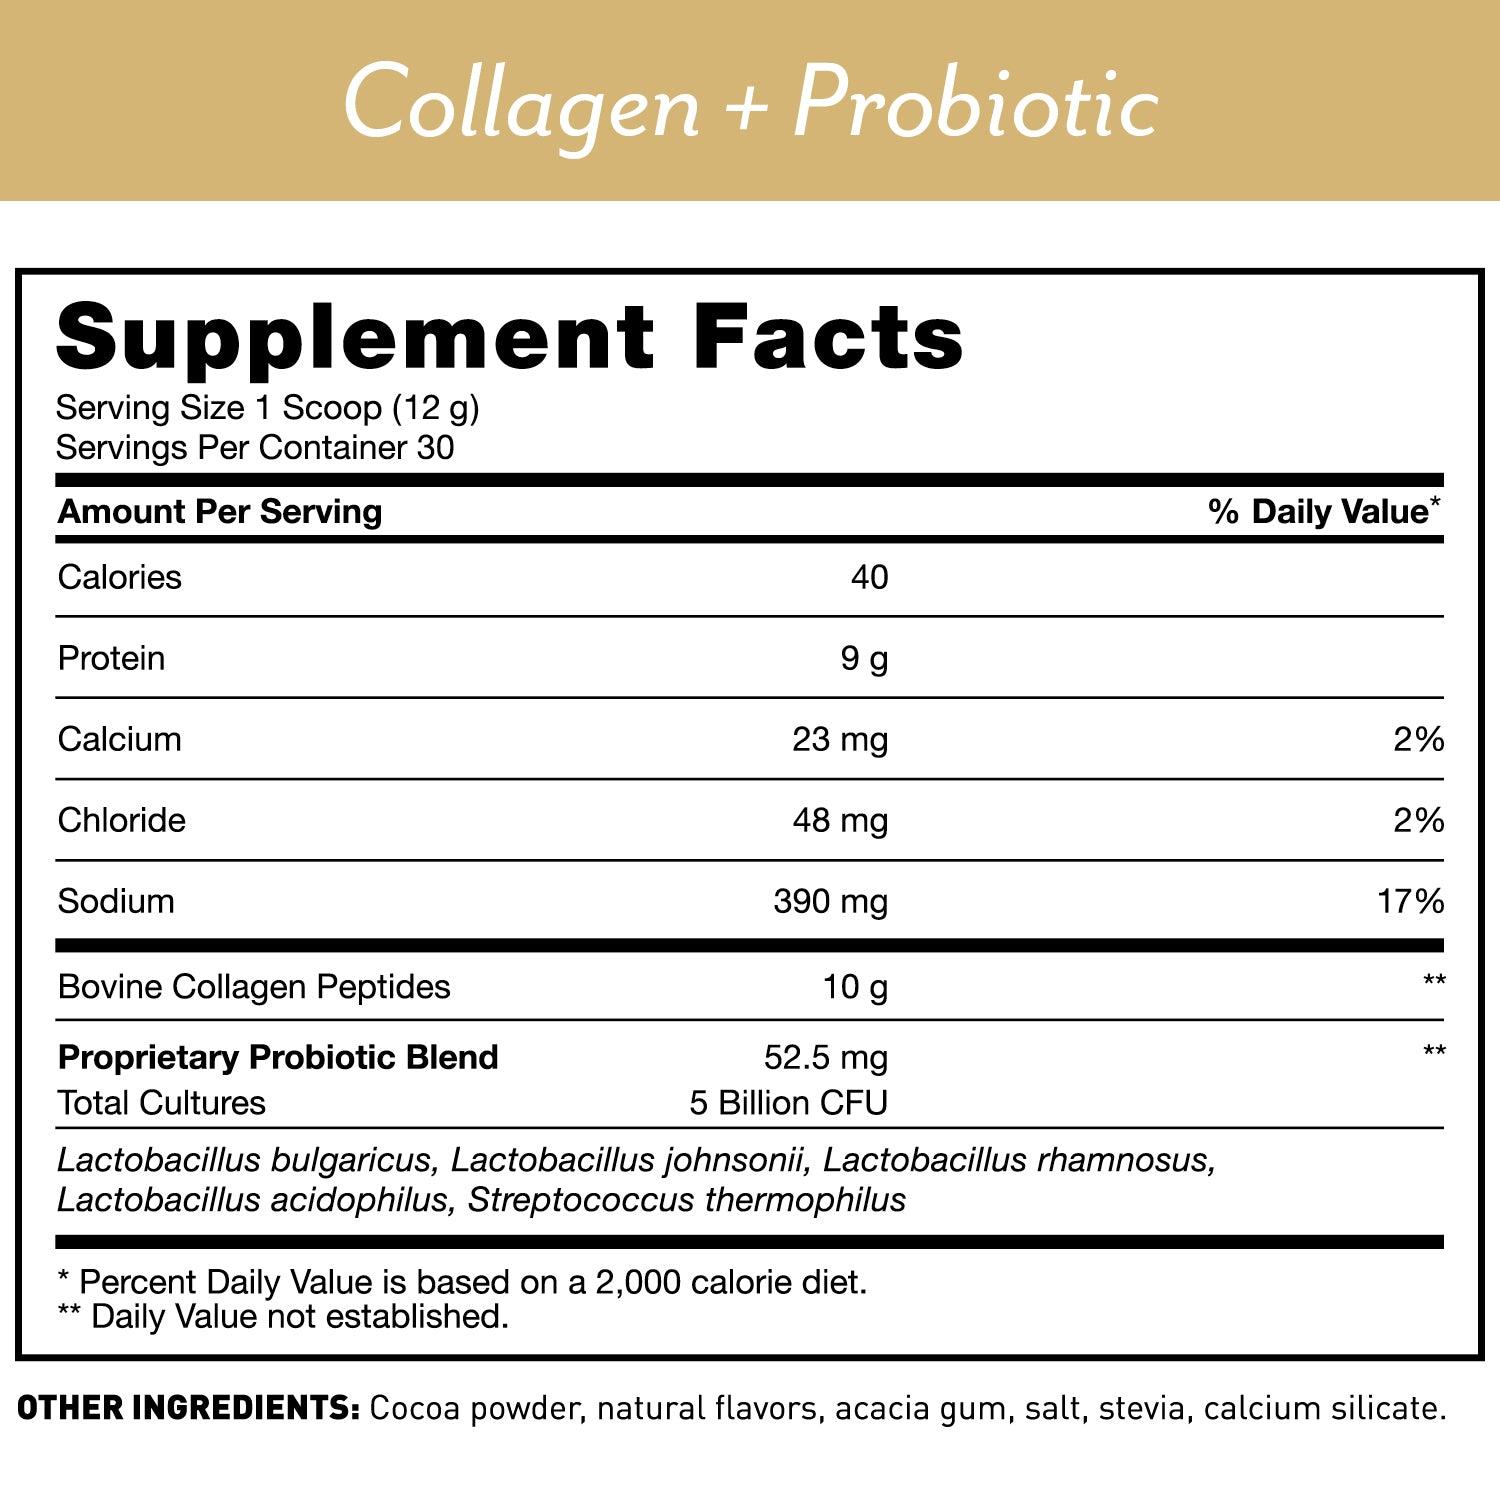 Collagen + Probiotic Supplement Facts Panel - Amy Myers MD®